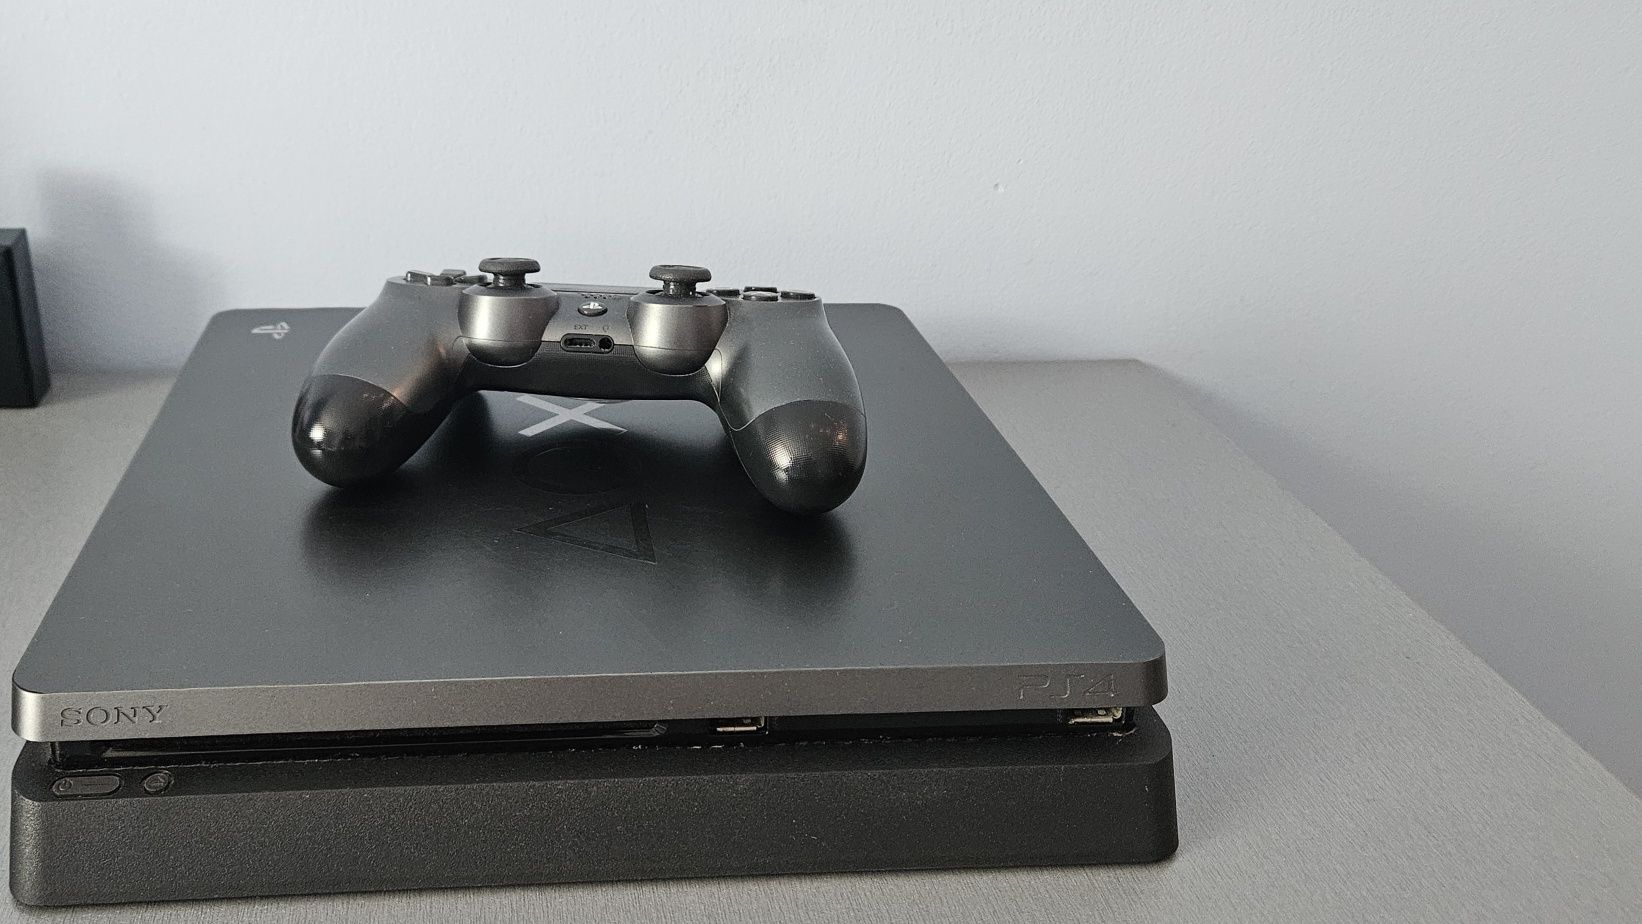 Playstation 4 slim: days of play limited edition